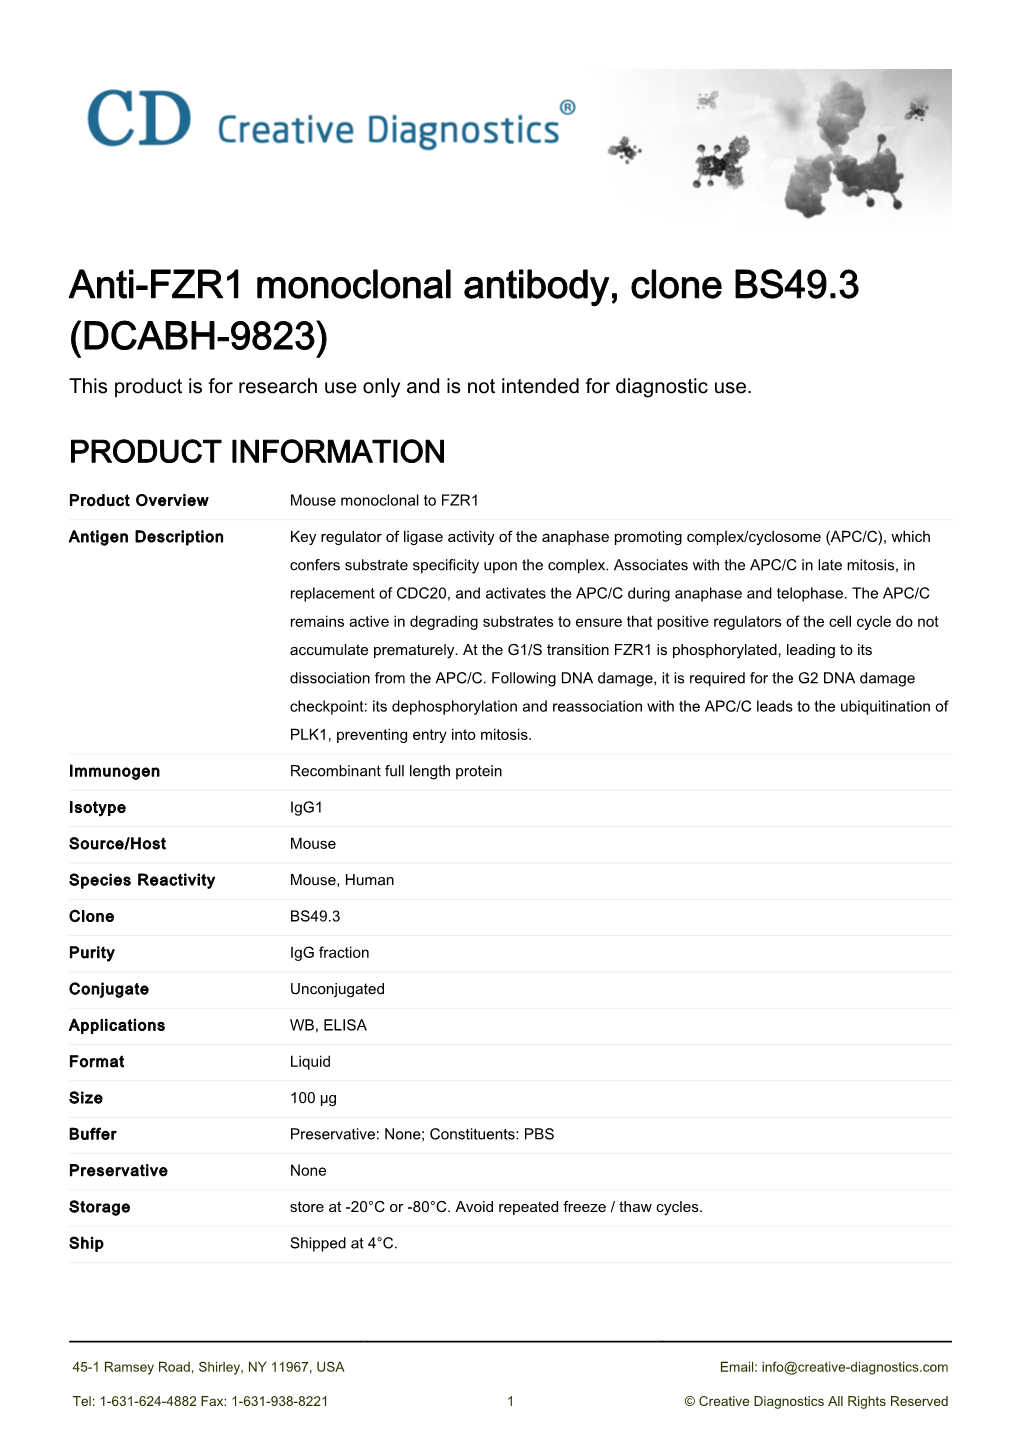 Anti-FZR1 Monoclonal Antibody, Clone BS49.3 (DCABH-9823) This Product Is for Research Use Only and Is Not Intended for Diagnostic Use